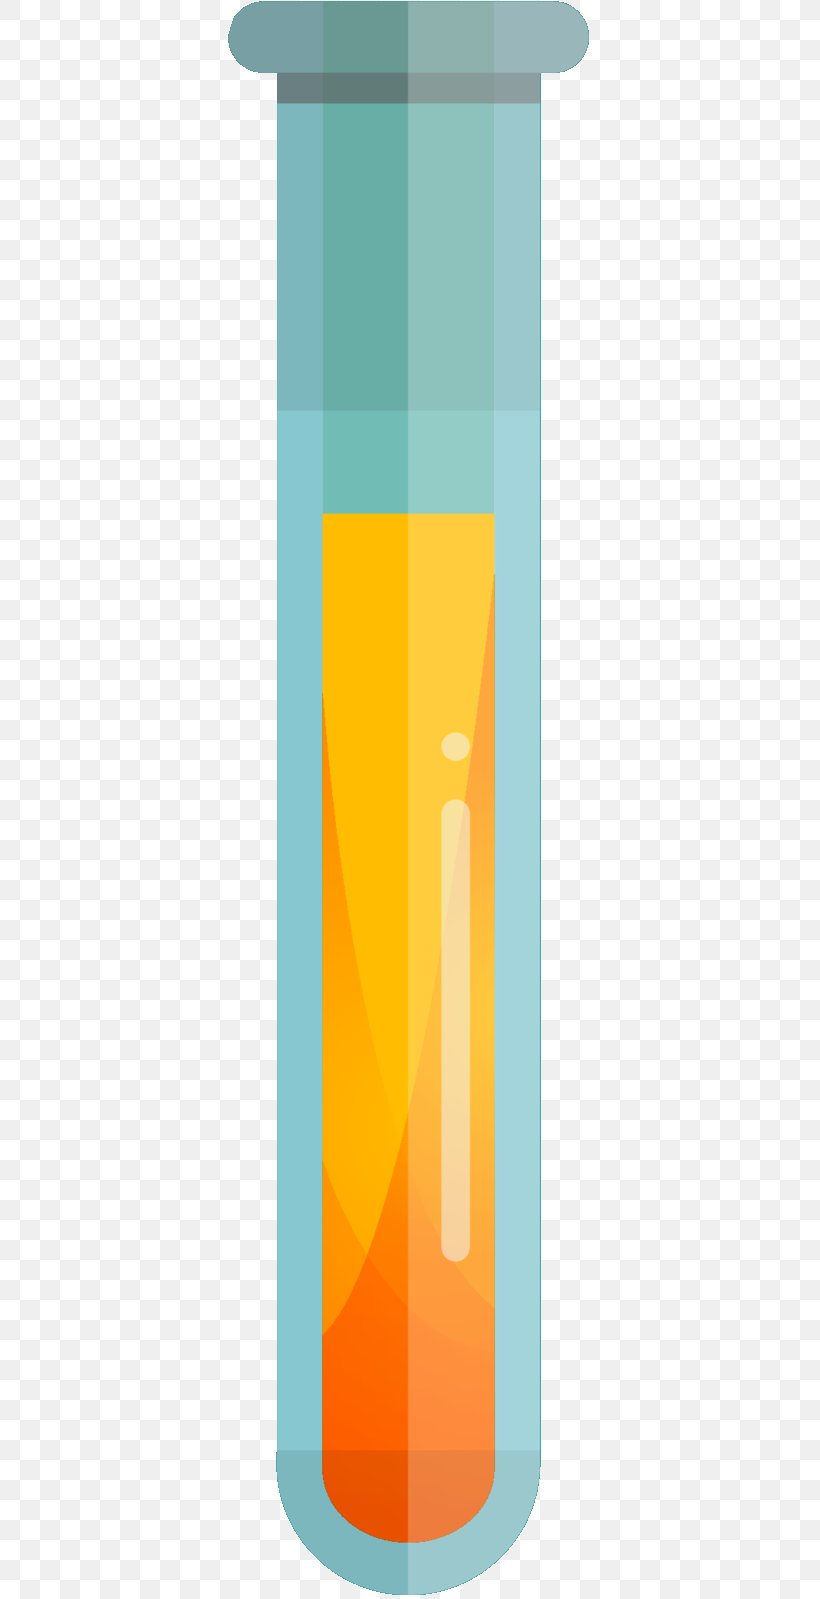 Product Design Angle Font Cylinder, PNG, 376x1599px, Cylinder, Orange, Rectangle, Turquoise, Yellow Download Free